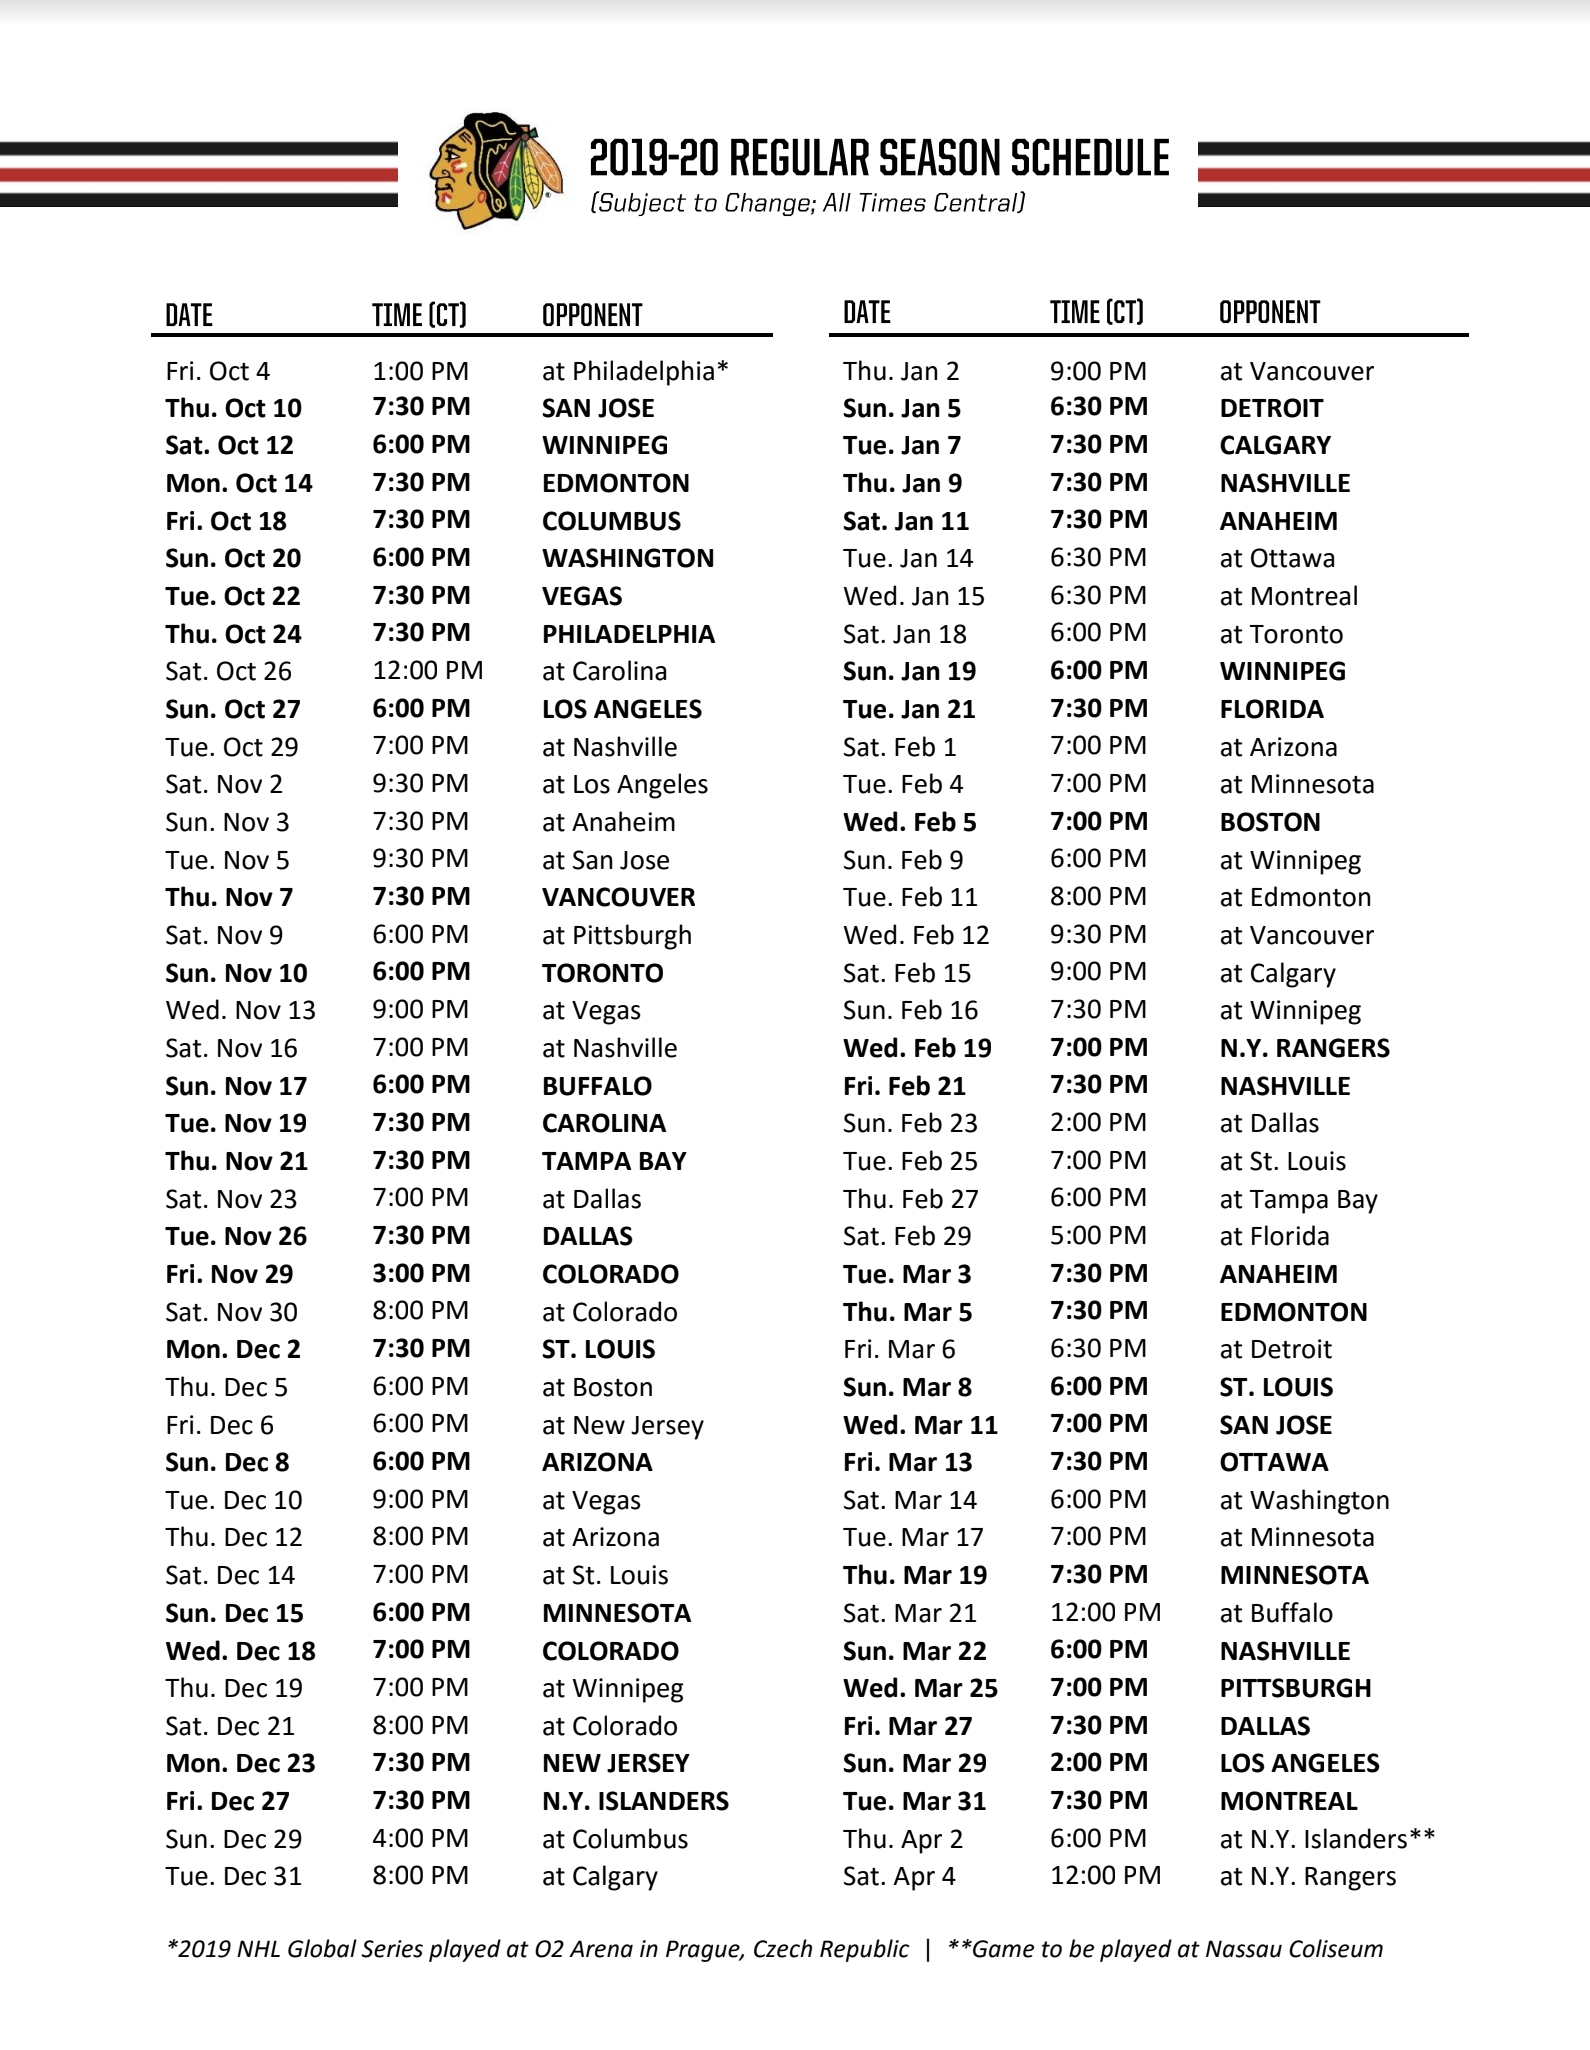 Blackhawks Release 2019-20 Schedule: Notes And Five Games To throughout Nashville Predators Schedule 2019 20 Printable